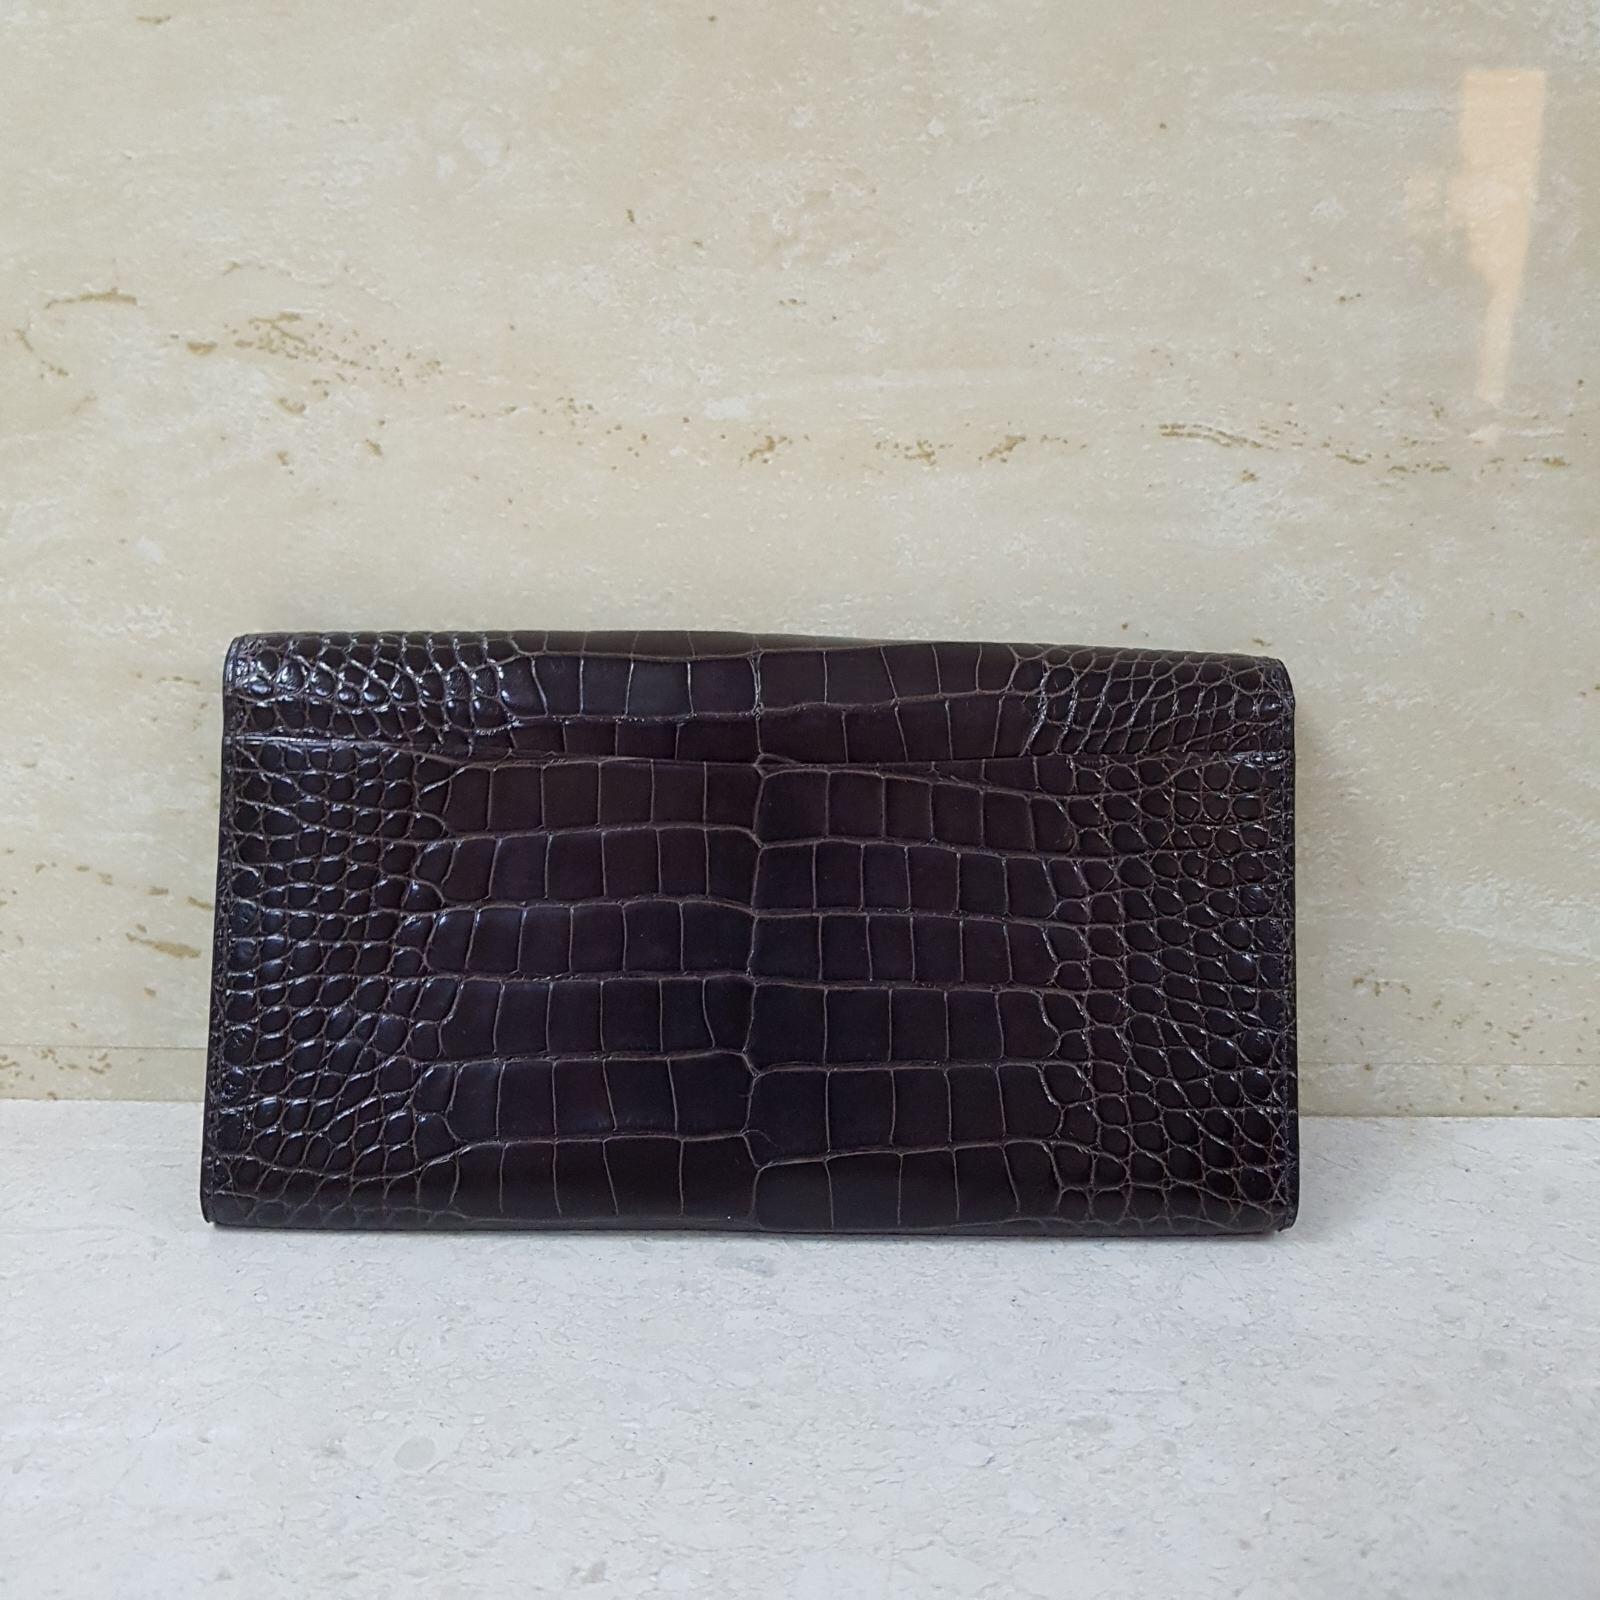 Gorgeous wallet in crocodile leather.
New. Never worn.
No original packaging.
7.9*3.9 inch
For buyers from EU we can provide shipping from Poland. Please demand if you need.